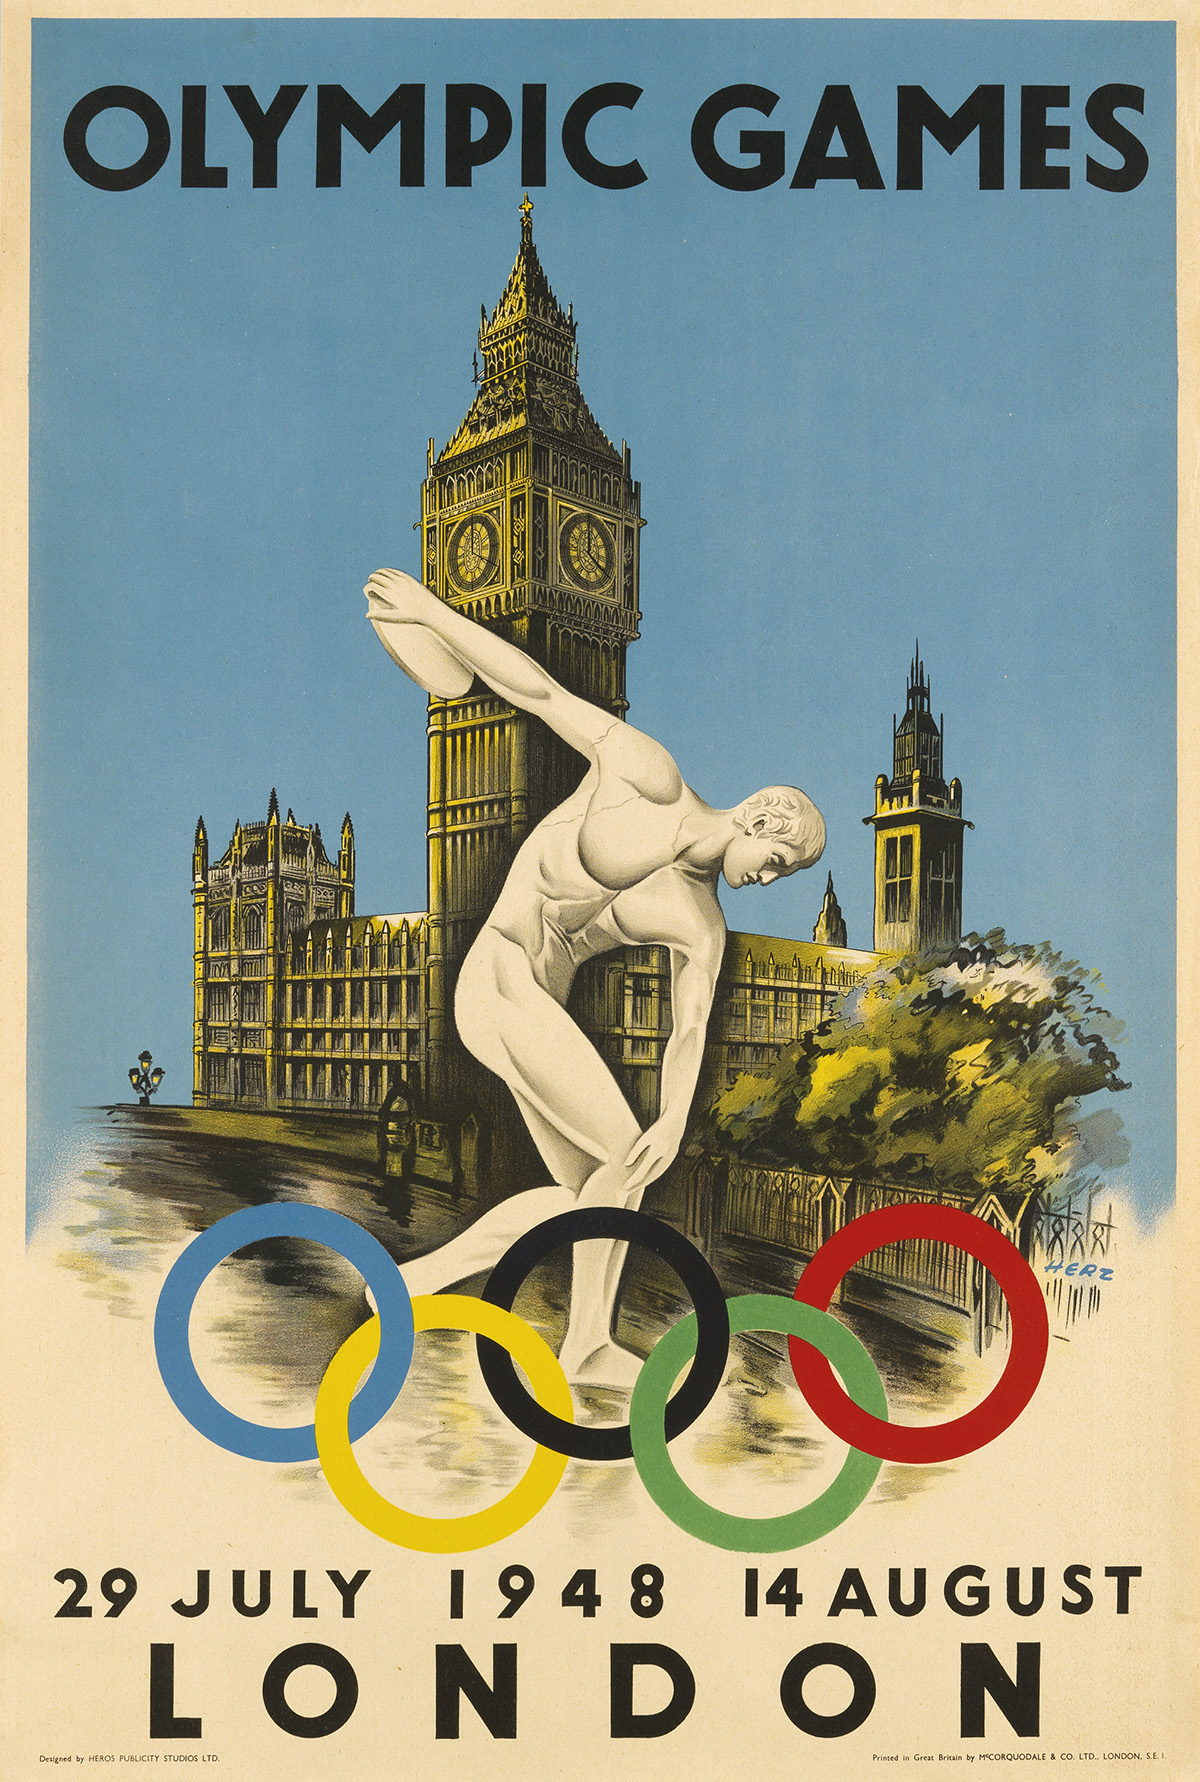 WALTER HERZ (1909-1965). OLYMPIC GAMES / LONDON. 1948. 30x20 inches, 76x50 cm. McCorquodale & Co., London.